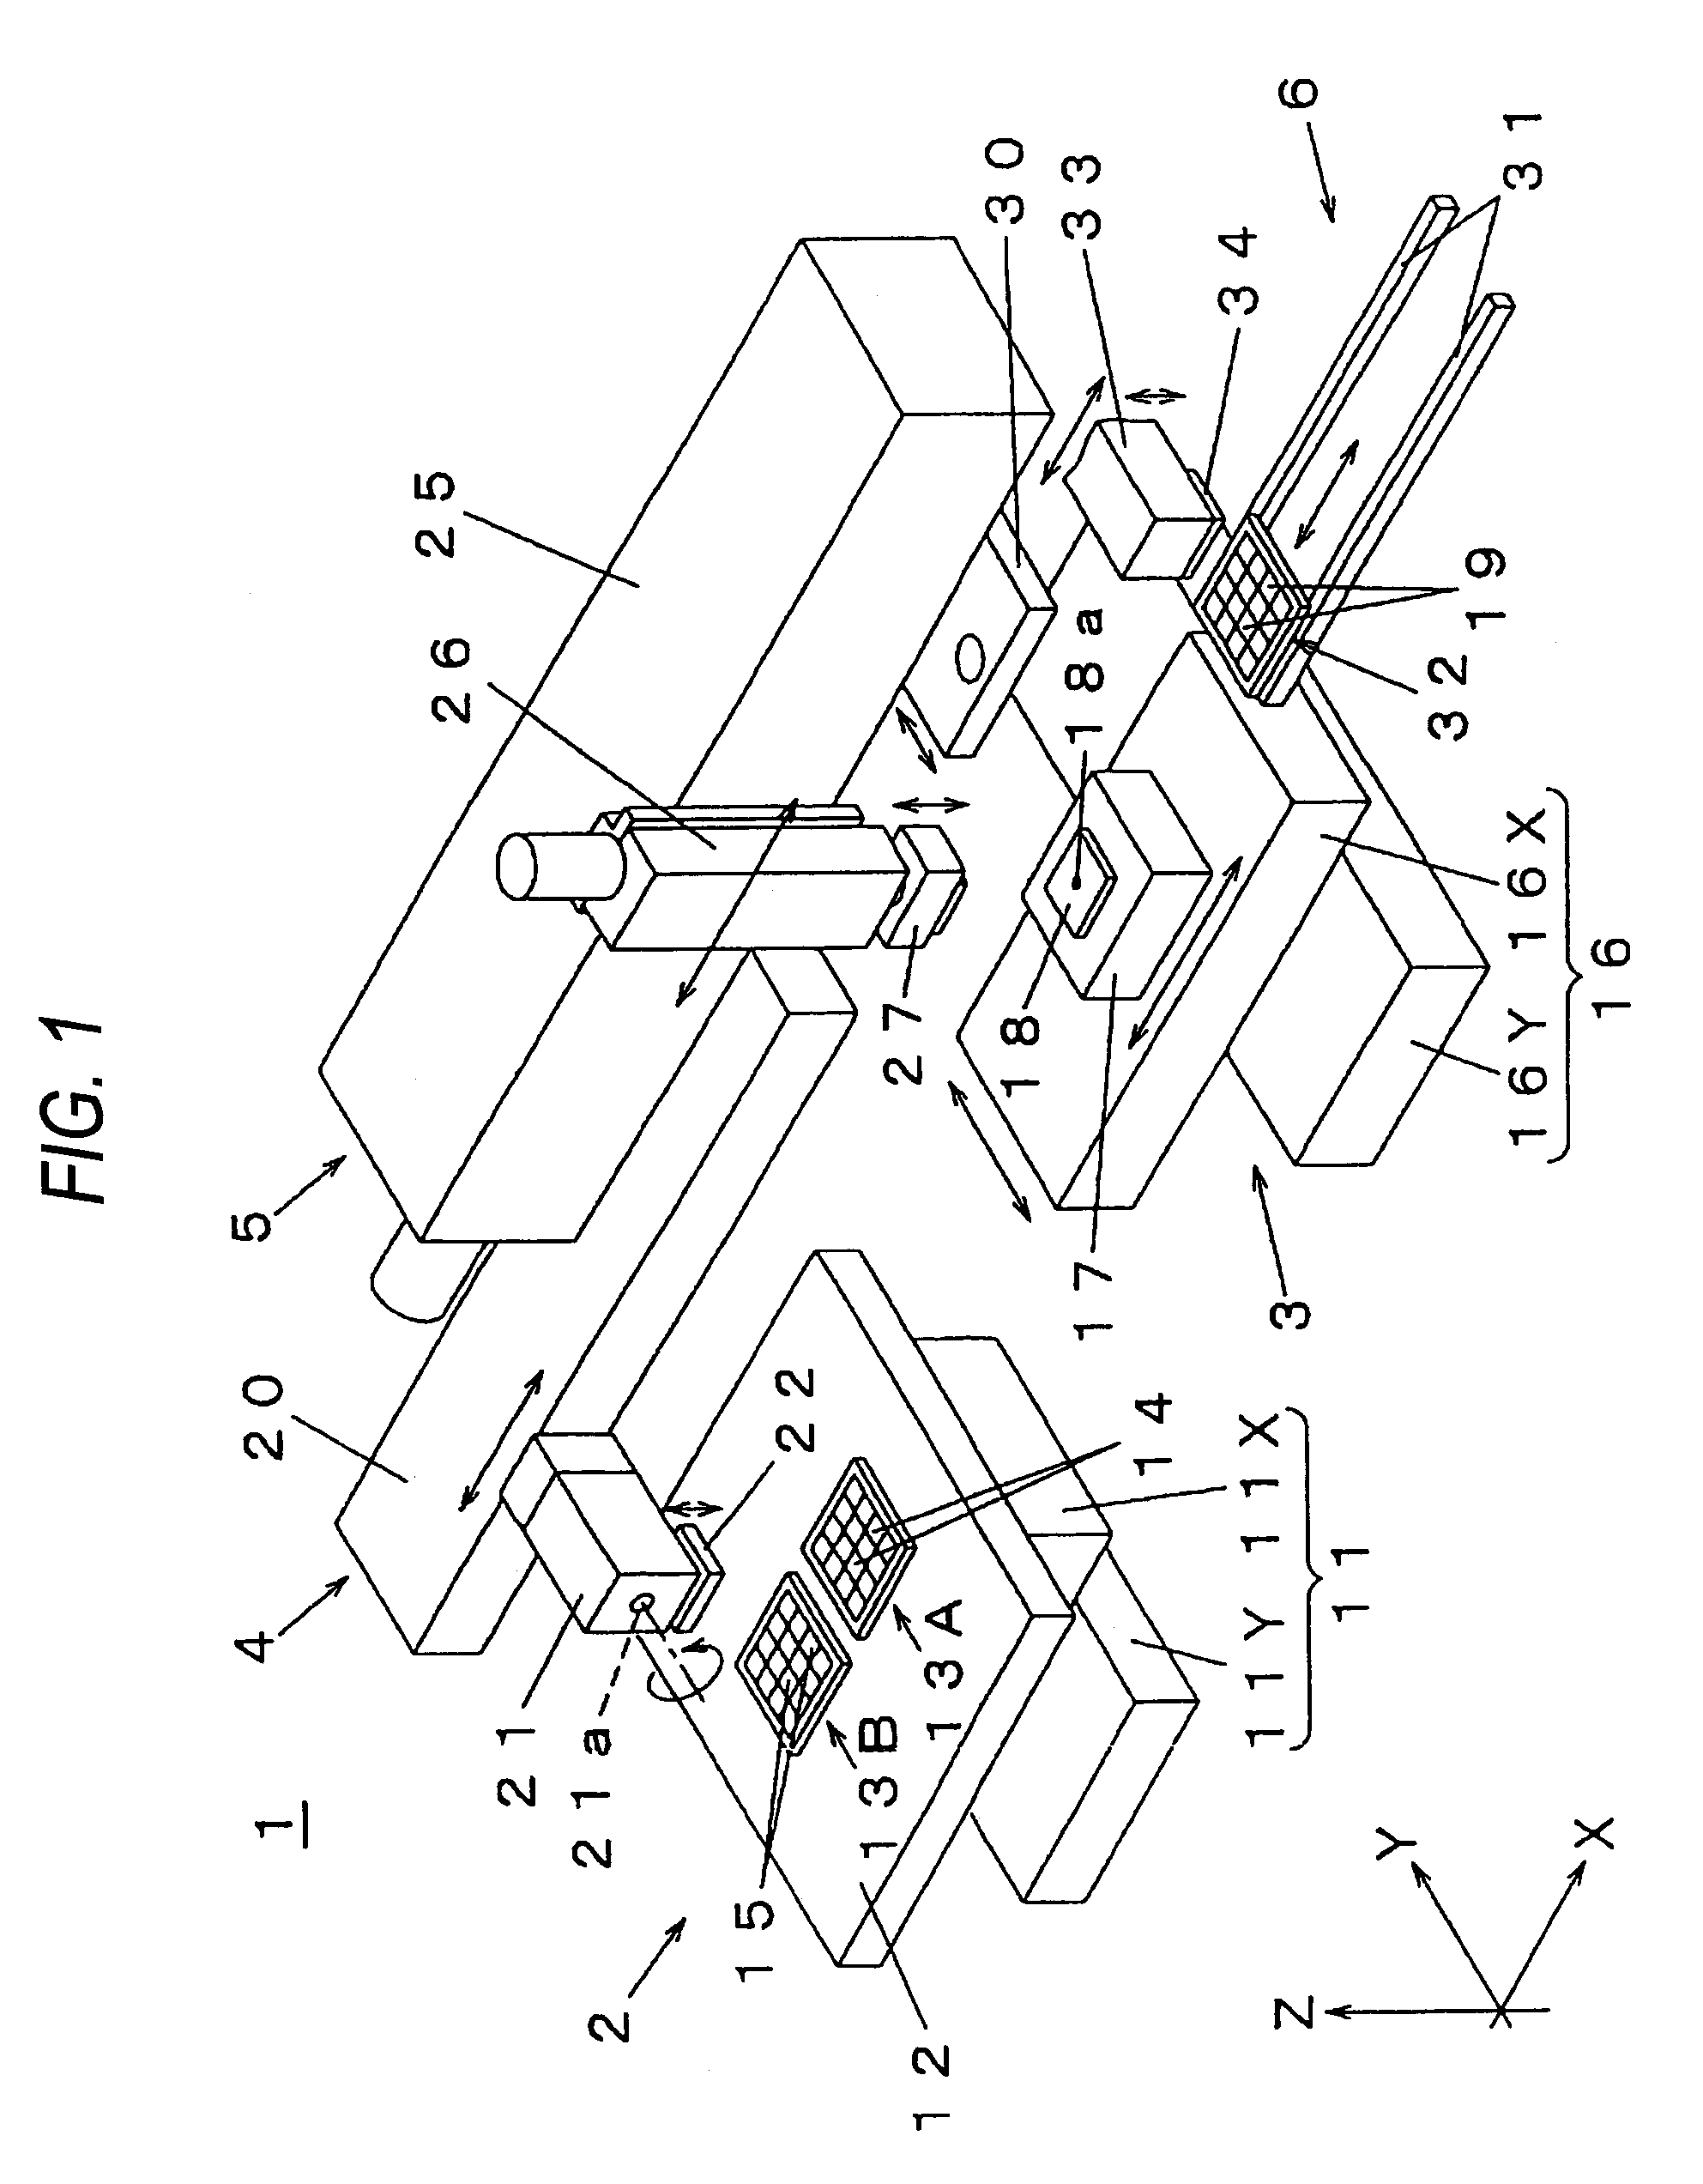 Component mounting method